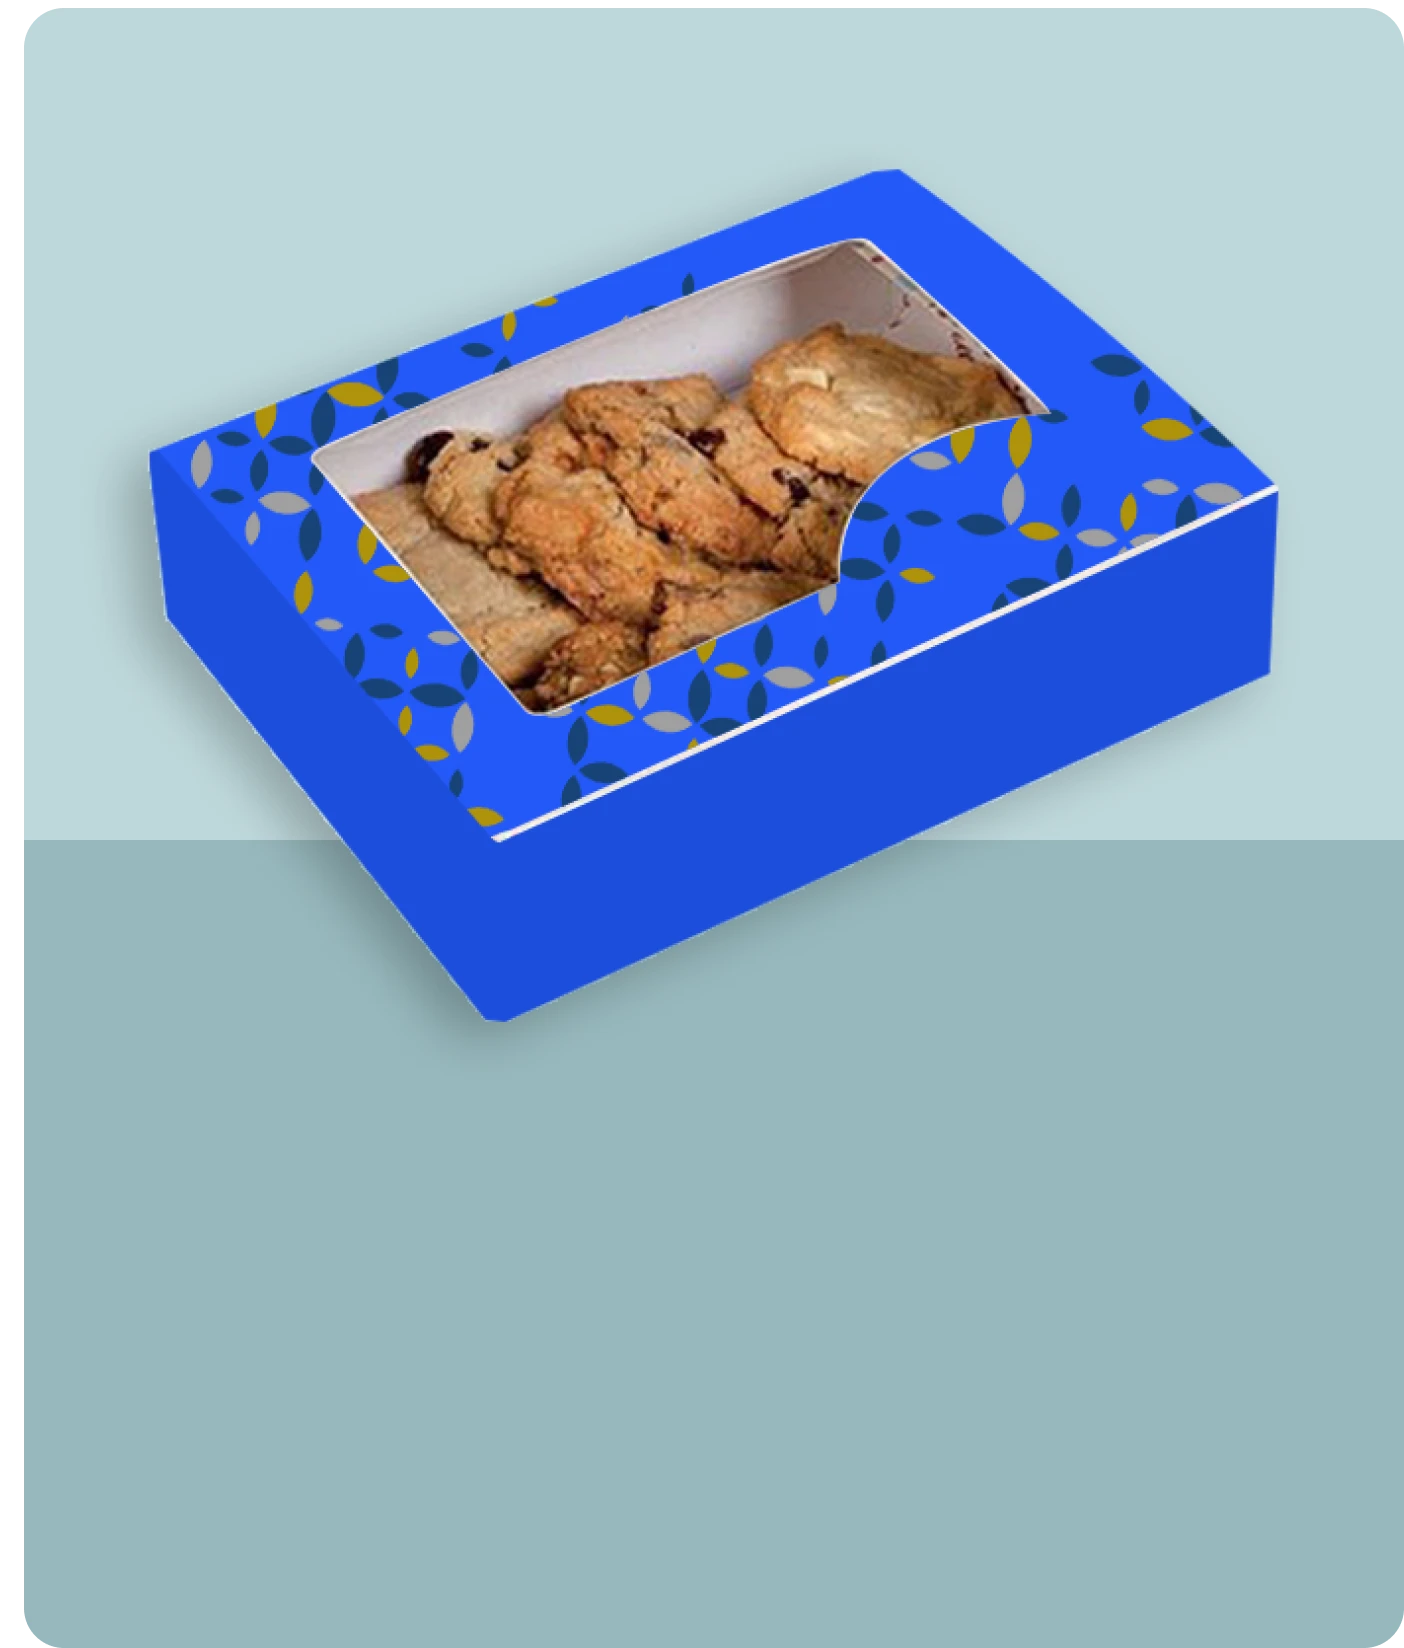 Cookie Boxes With a Window related products image | The Box Lane